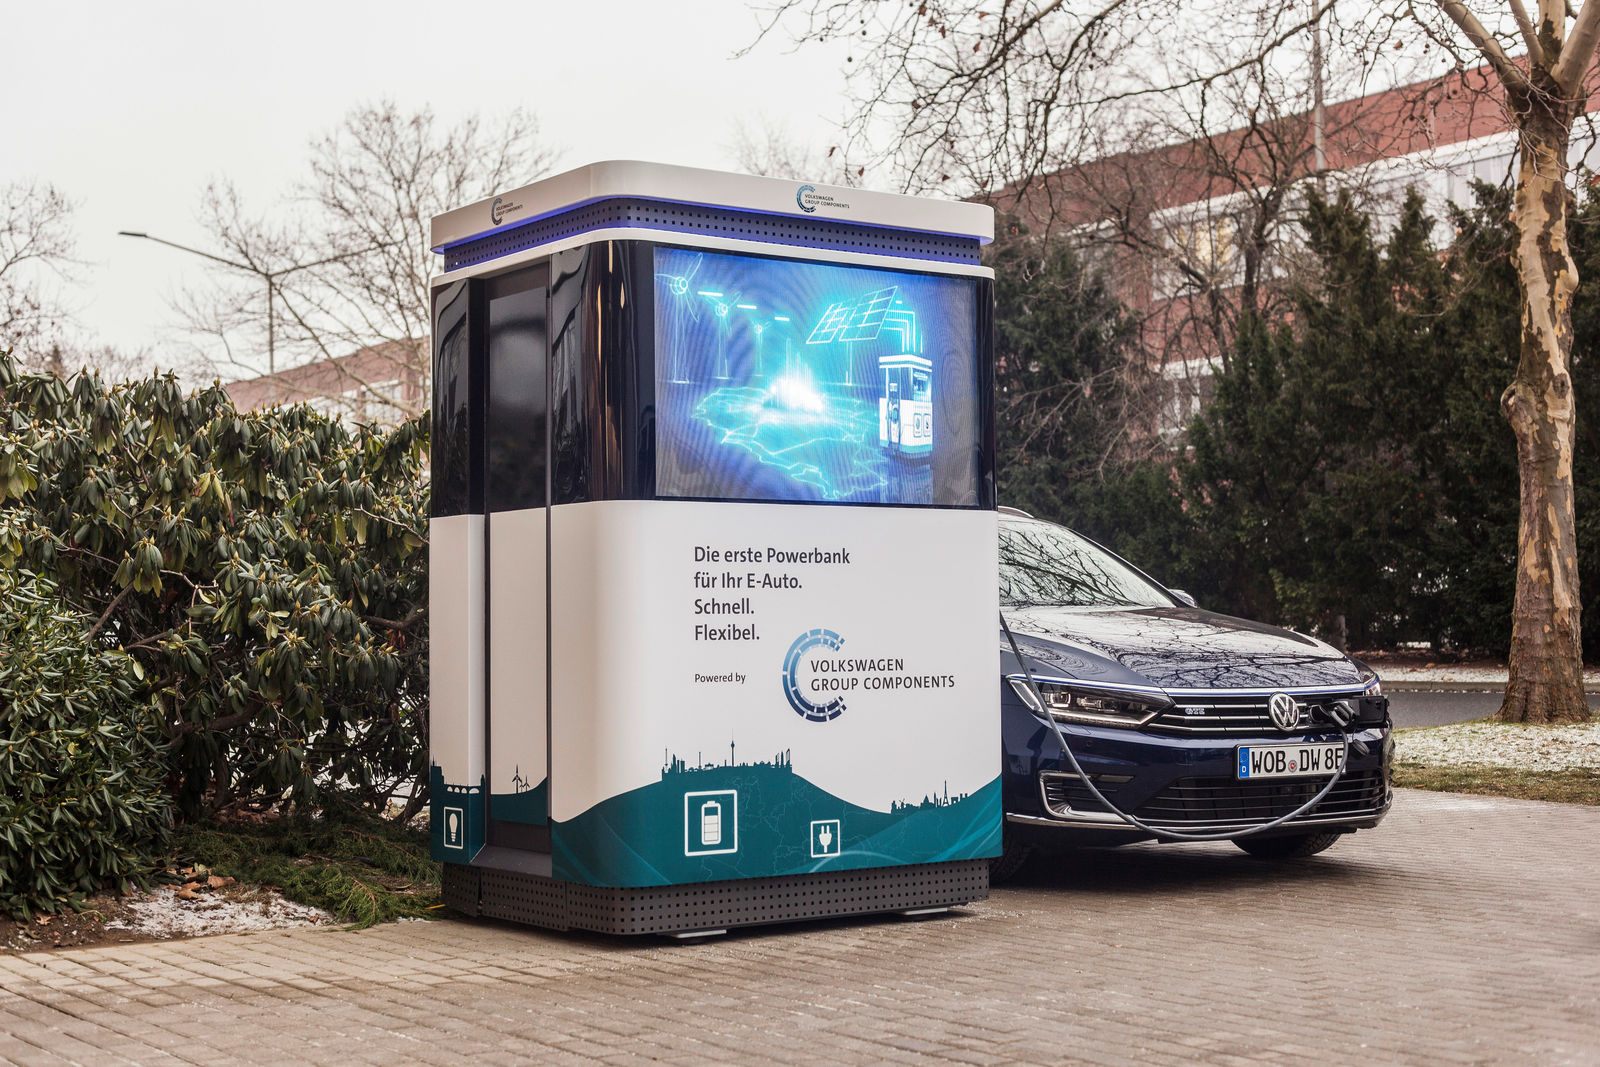 The Flexible Quick Charging Station at the press conference in Salzgitter